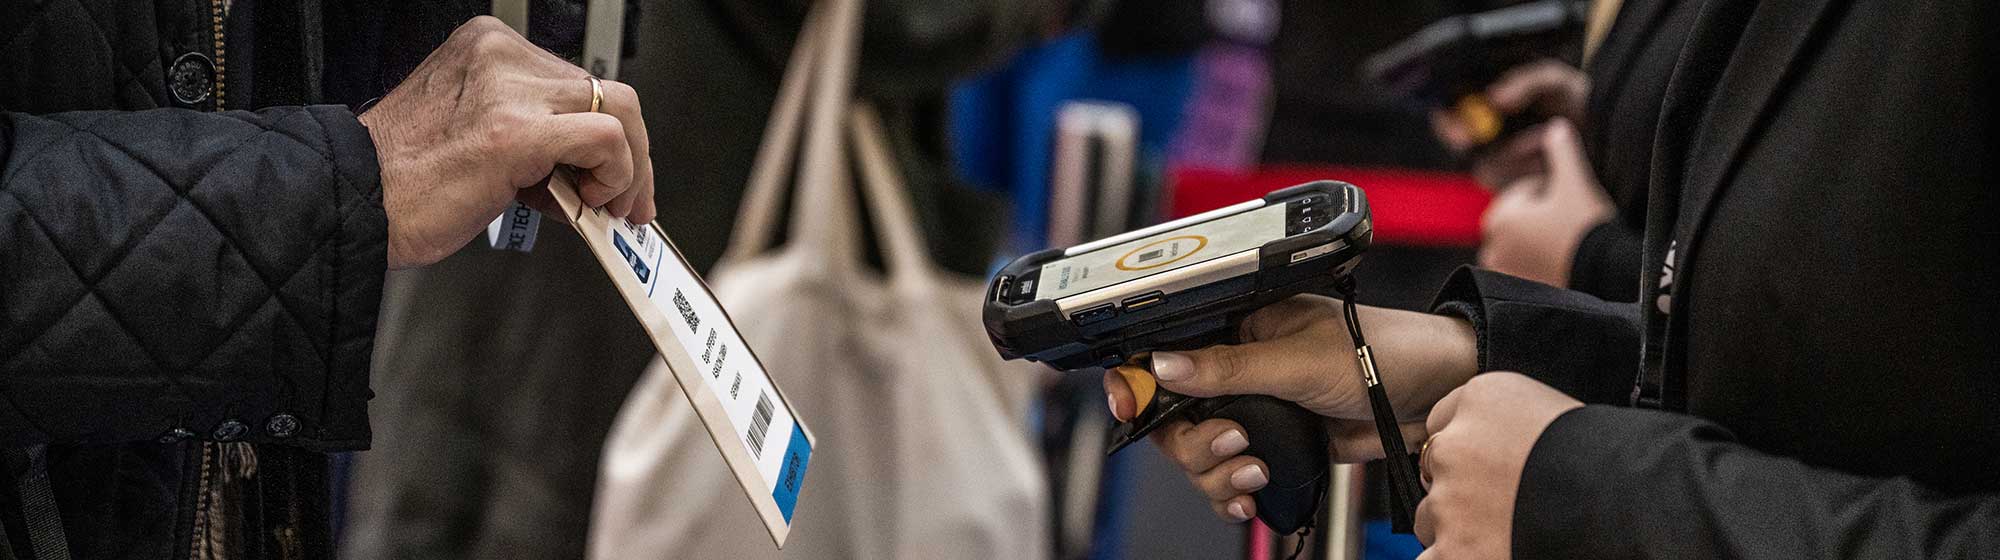 A person is handing over a badge to another person who is scanning it with a handheld device. The image captures the indoor entrance of Milipol Paris's event